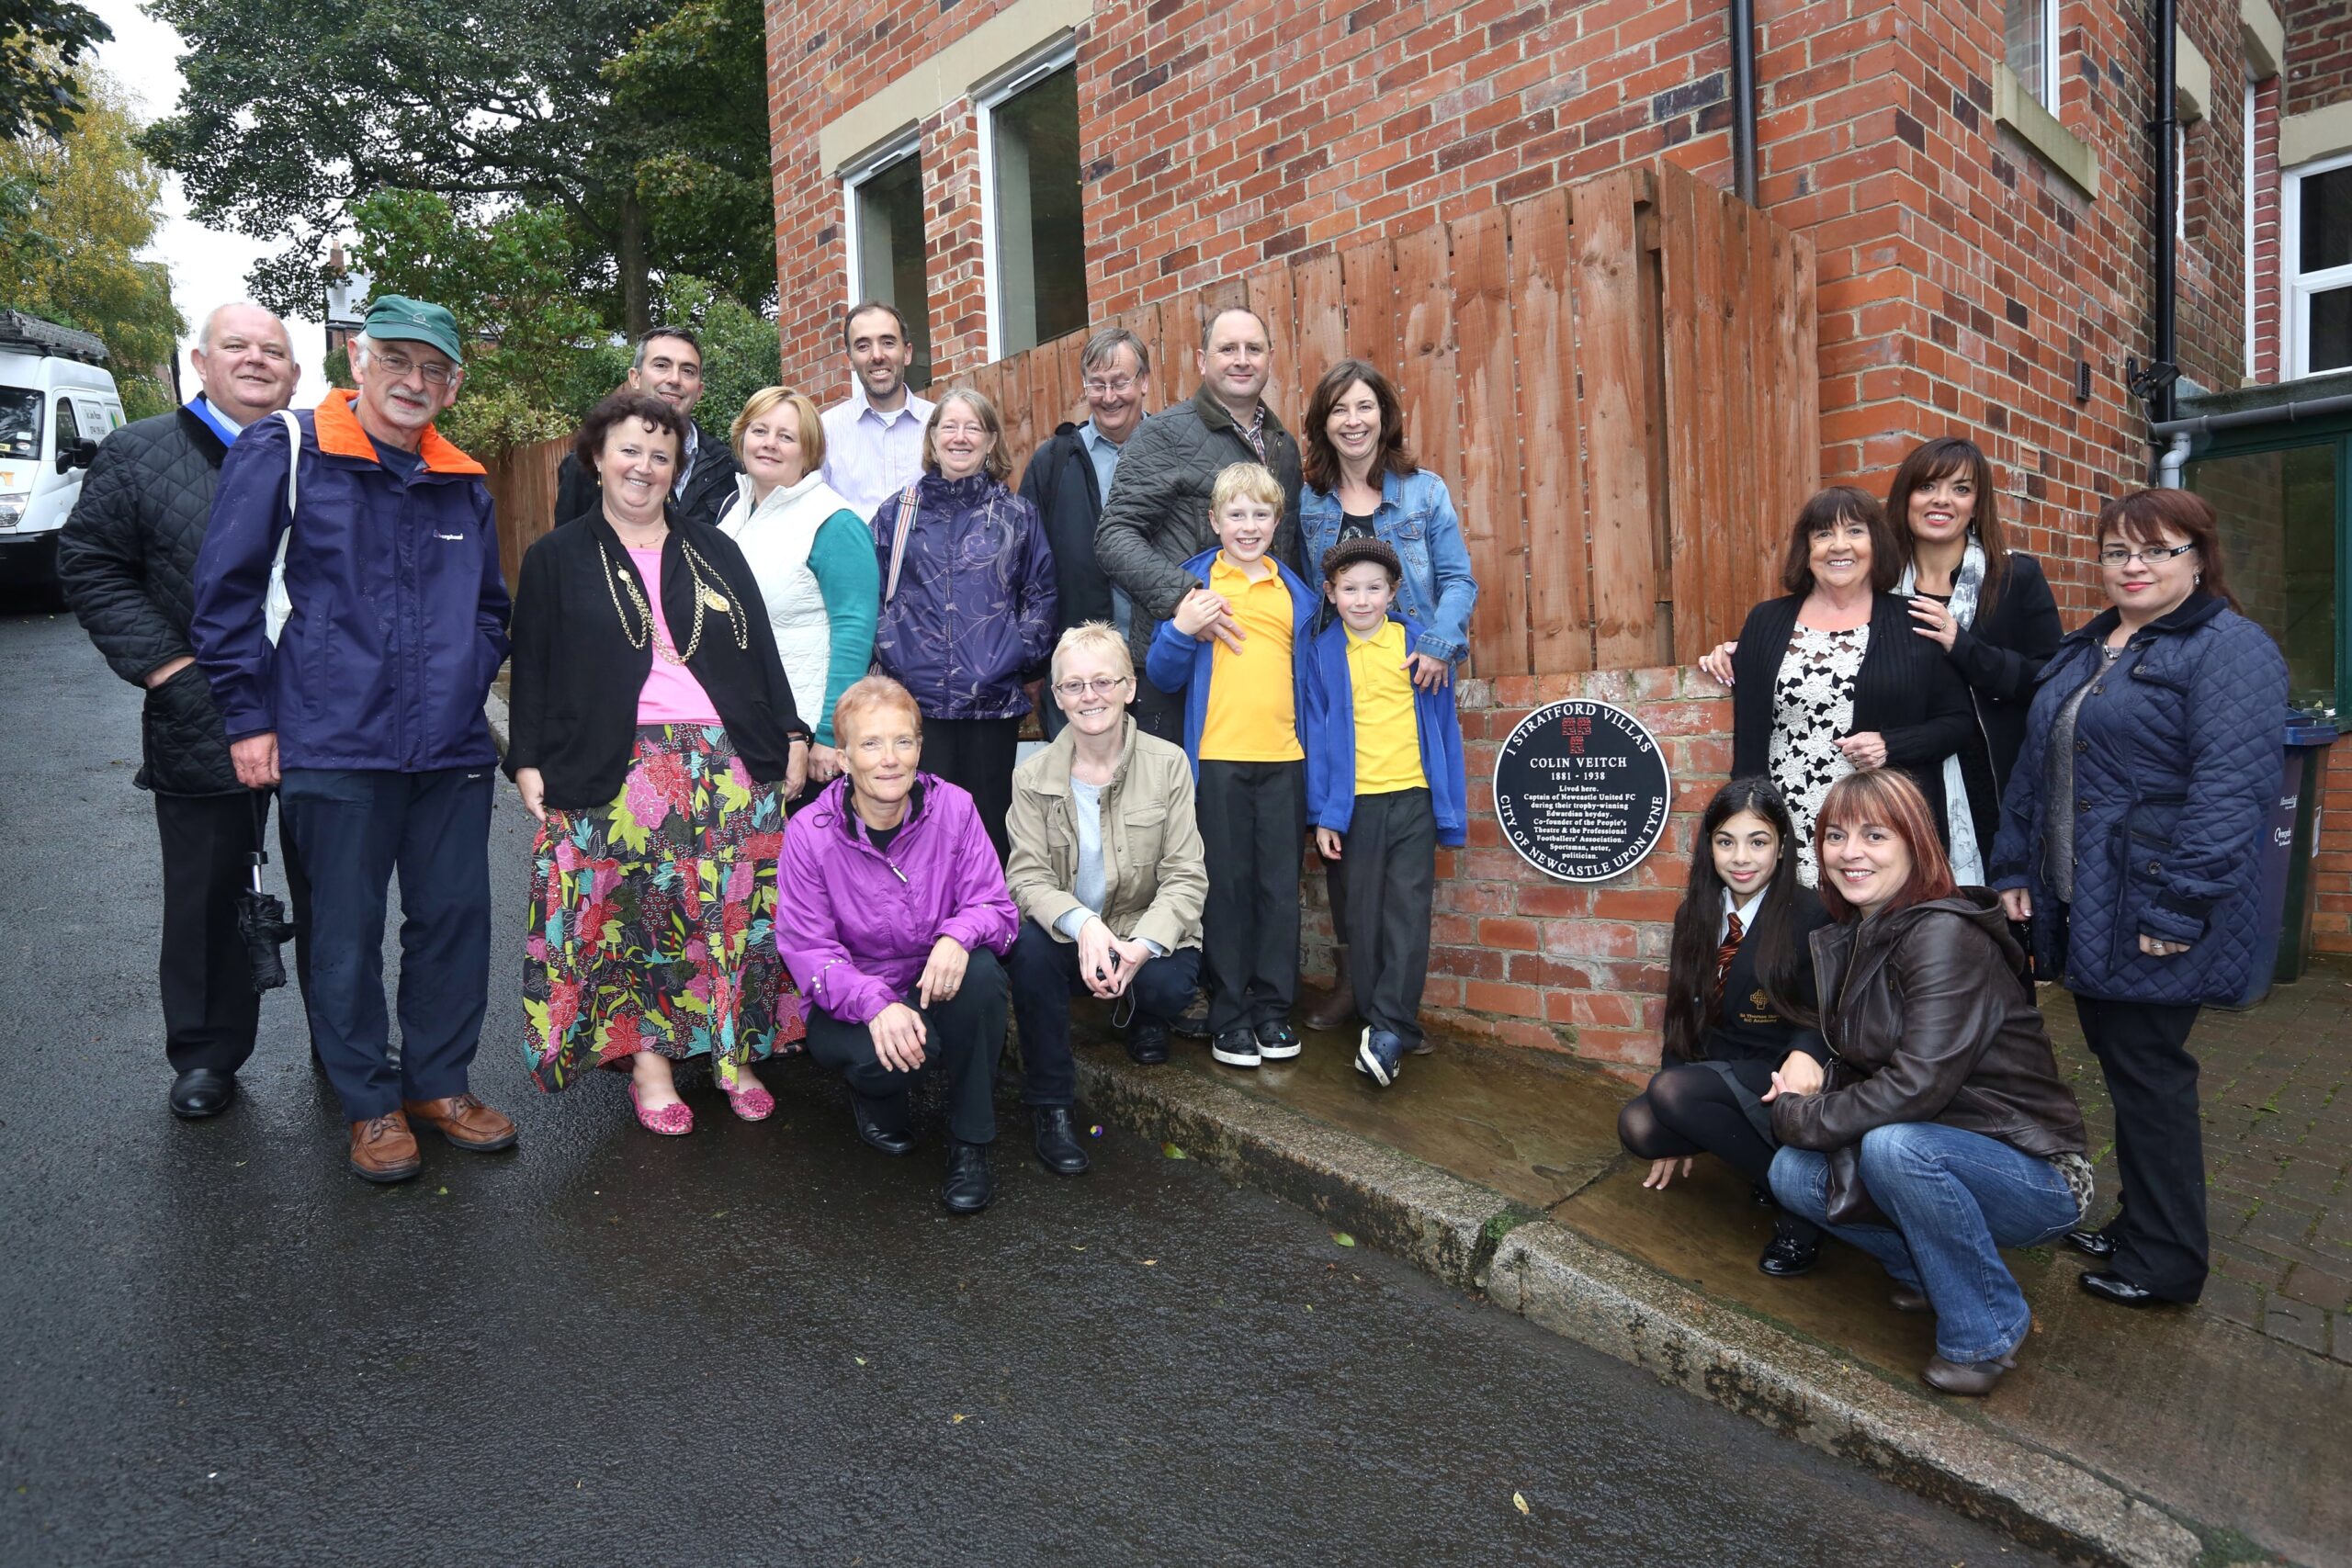 Members of Heaton History group, the Veitch family, the Smith family with the Lord Mayor and councillors.